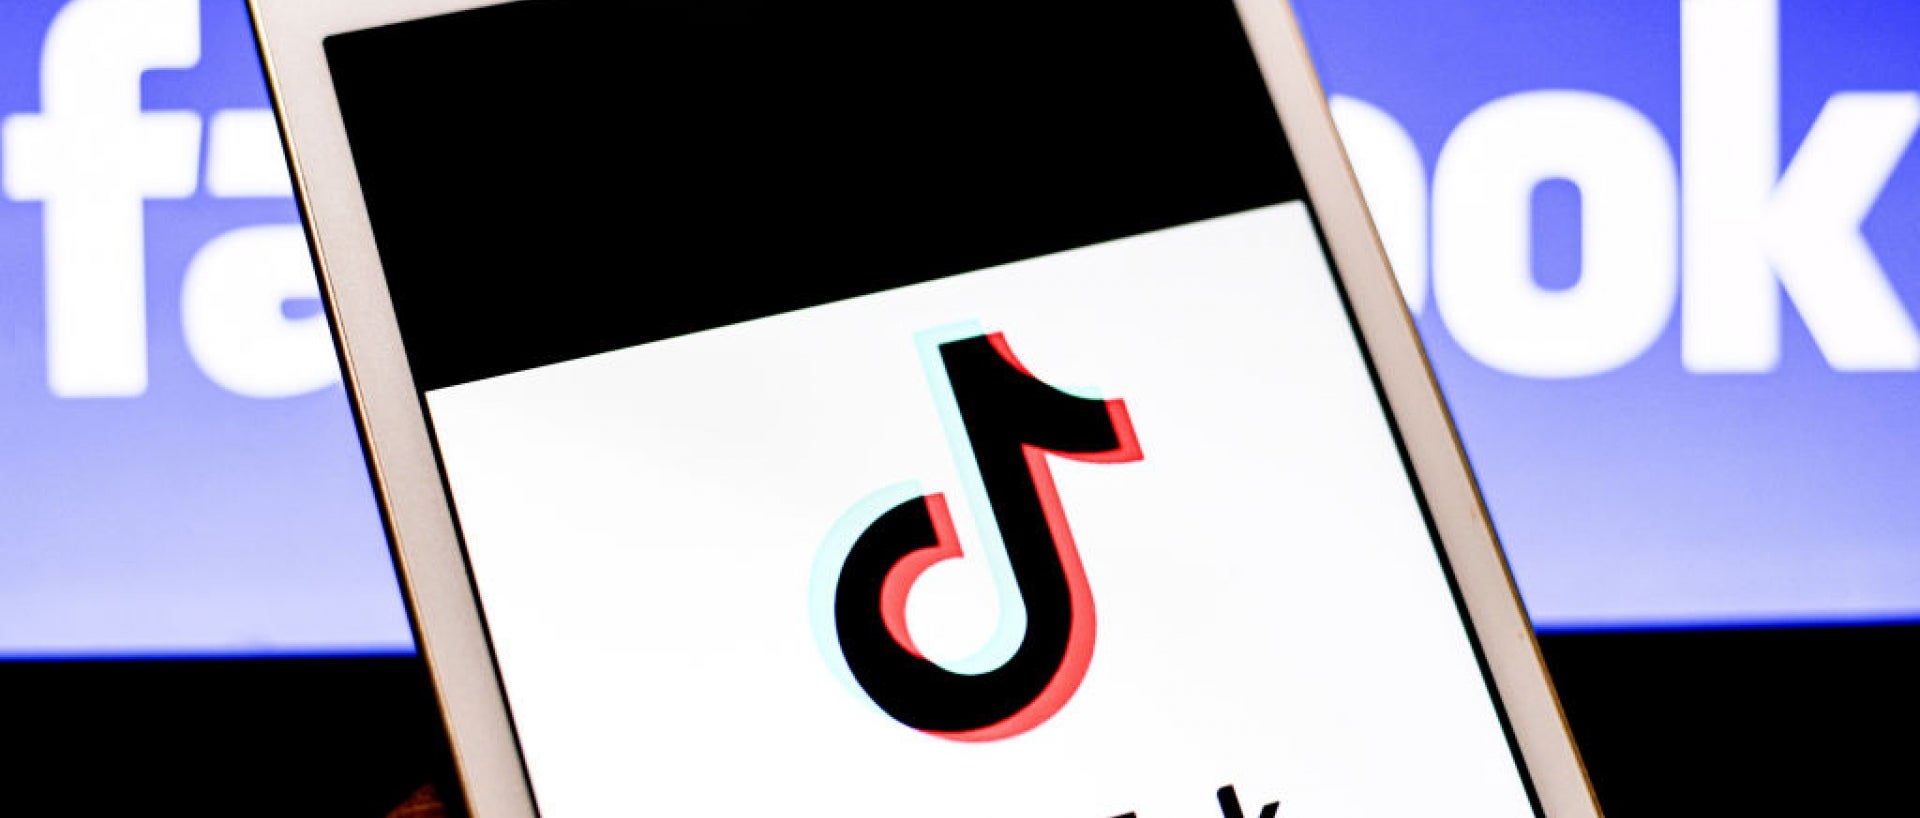 Tiktok logo on the screen of a phone being held by a hand, the facebook logo in the background